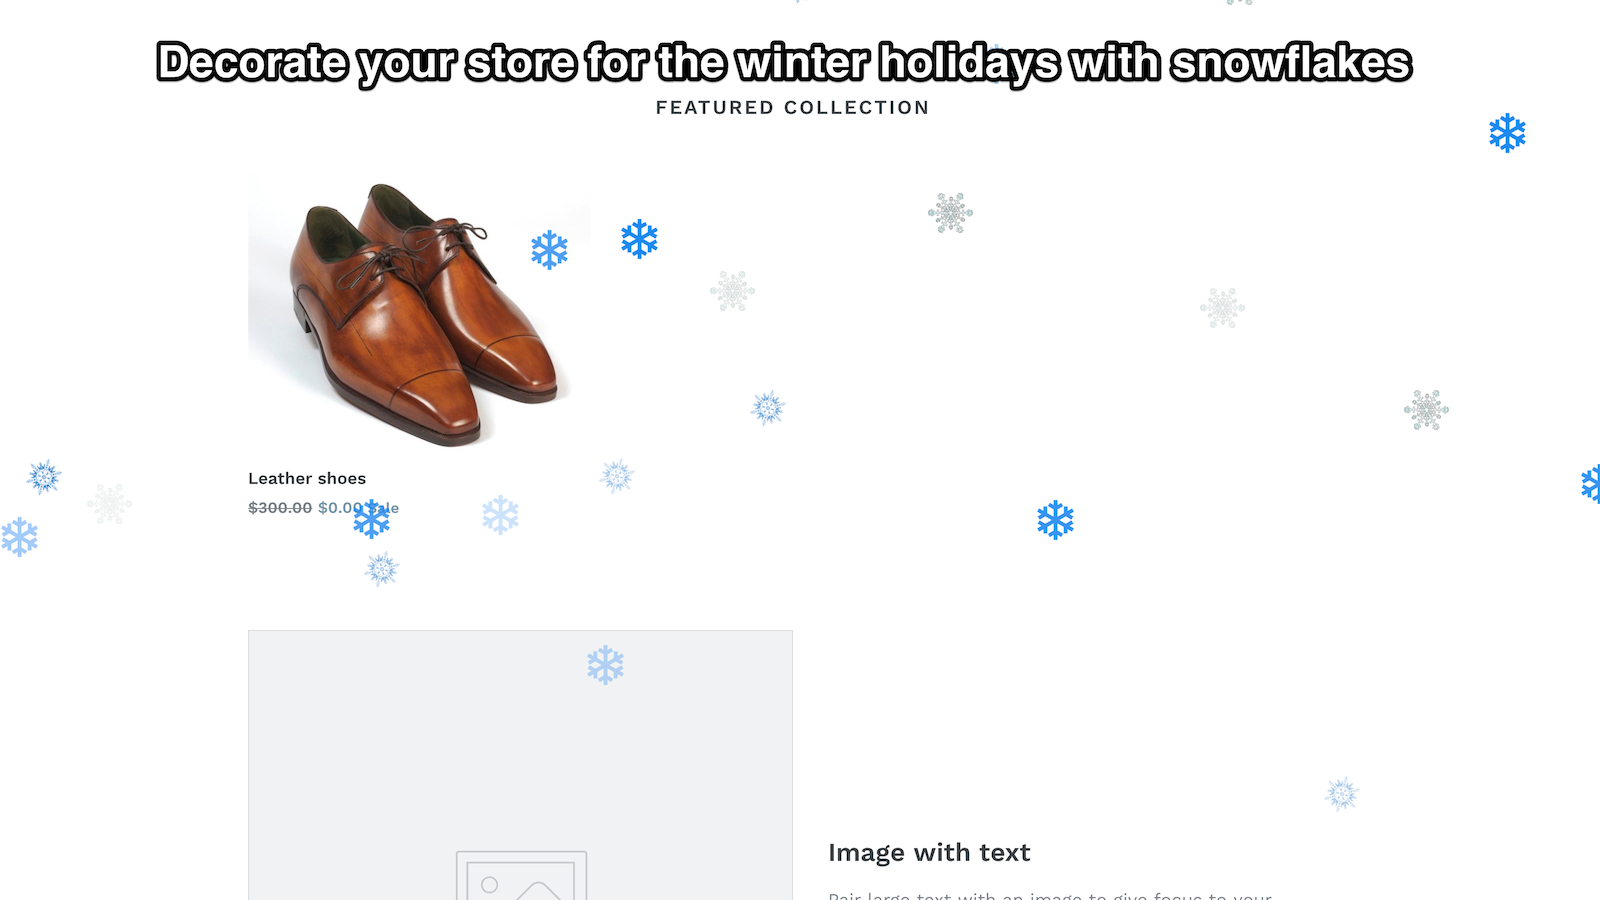 Decorate your store with snowflakes for the winter holidays